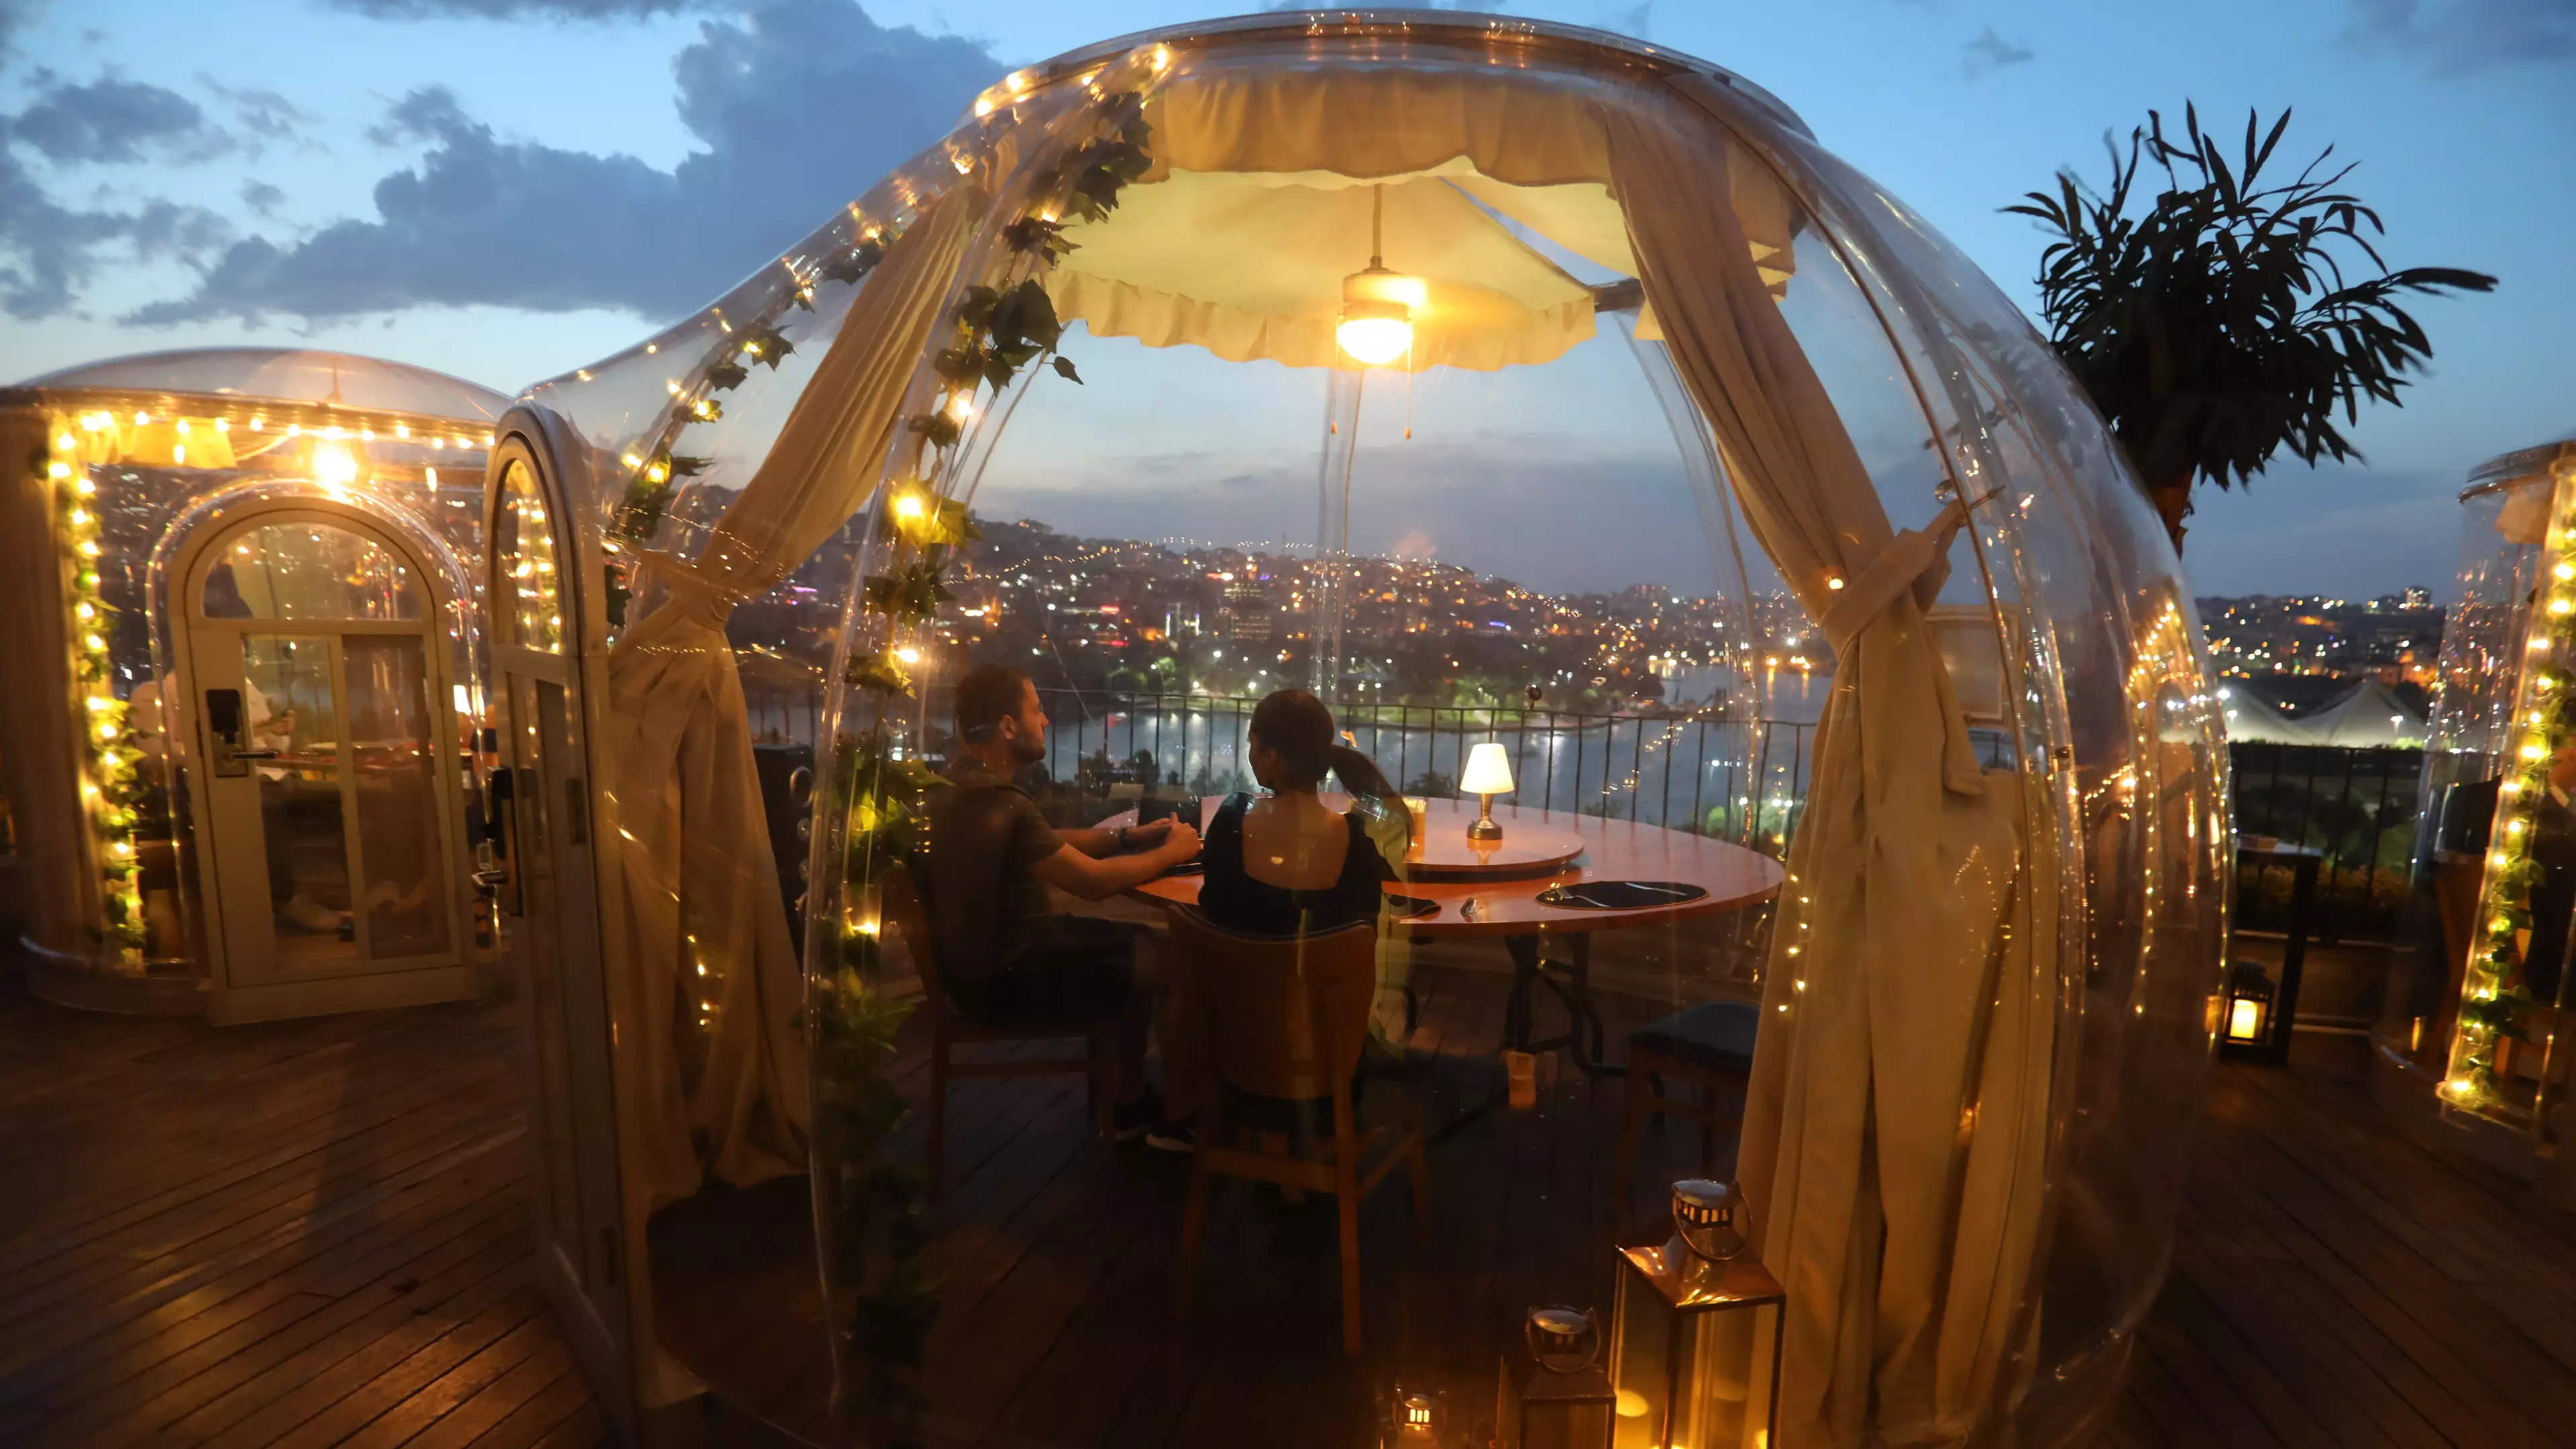 Restaurant In Turkey Fits Plastic Domes For Diners Post-Lockdown 